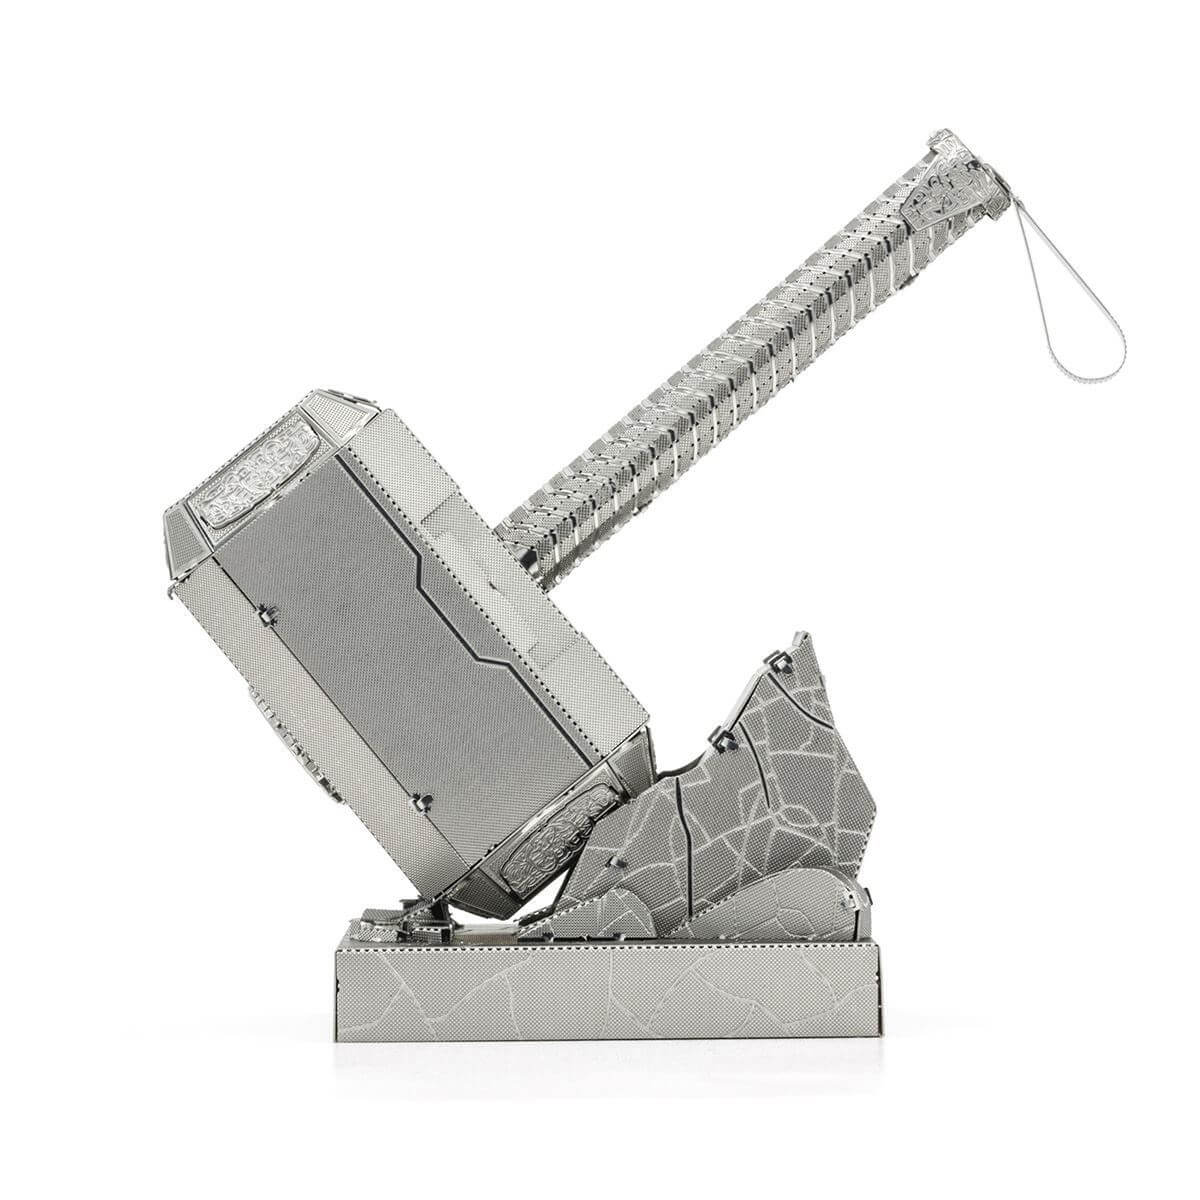 Side view of the marvel hammer.